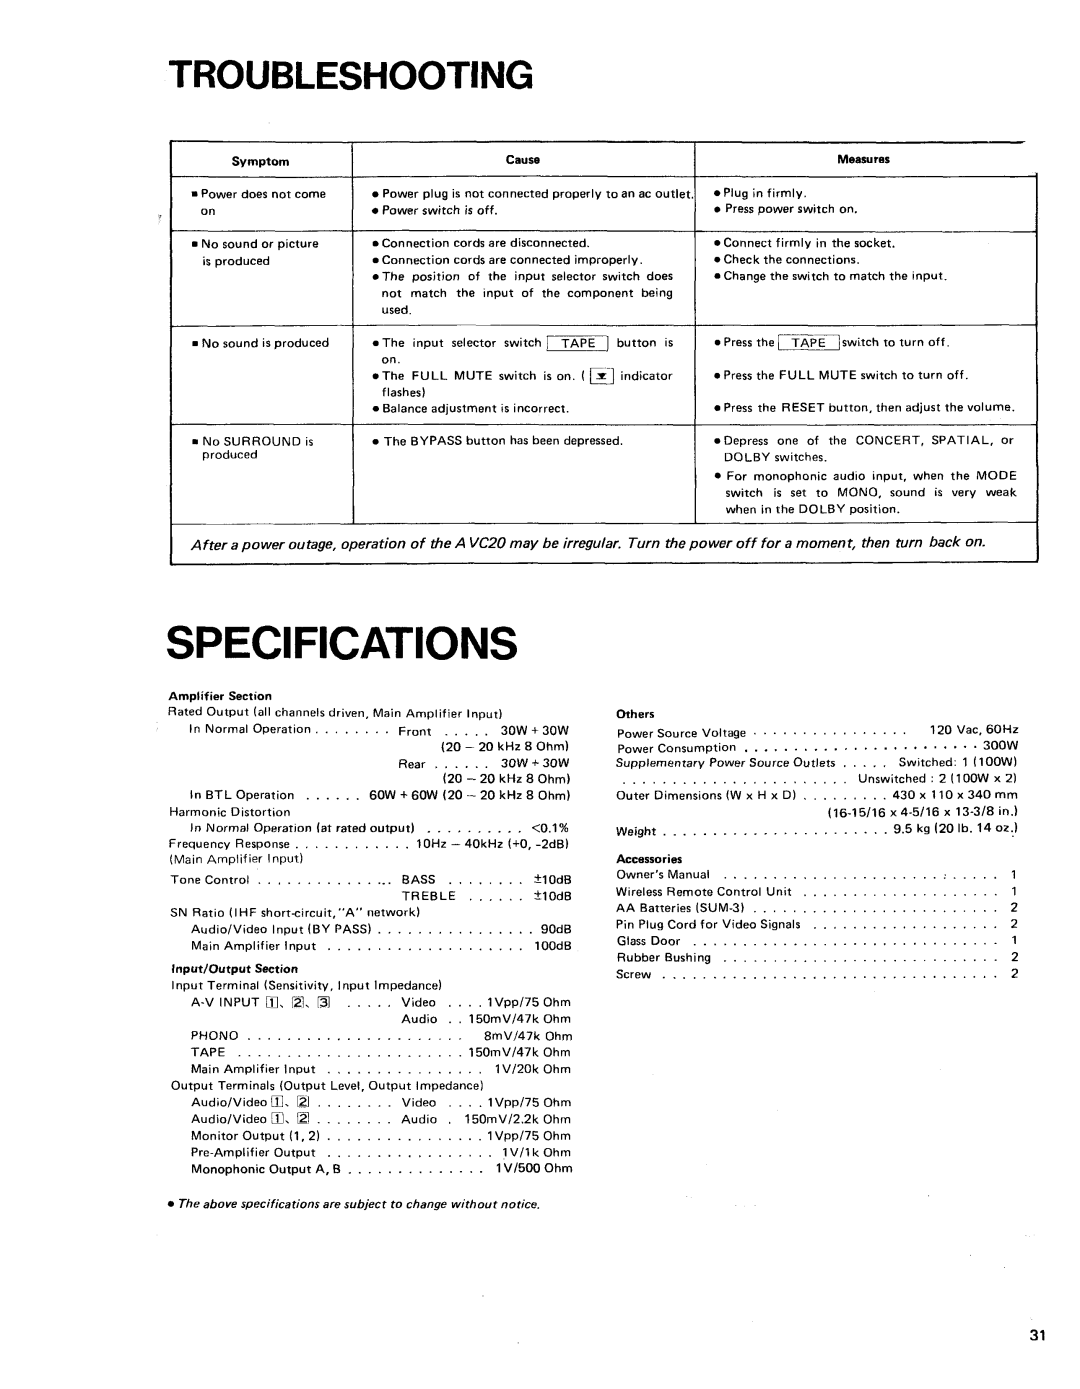 Shure AVC20 owner manual Specifications, 0.1%, AlOdB, 90dB, lOOdB, Power source Voltage 